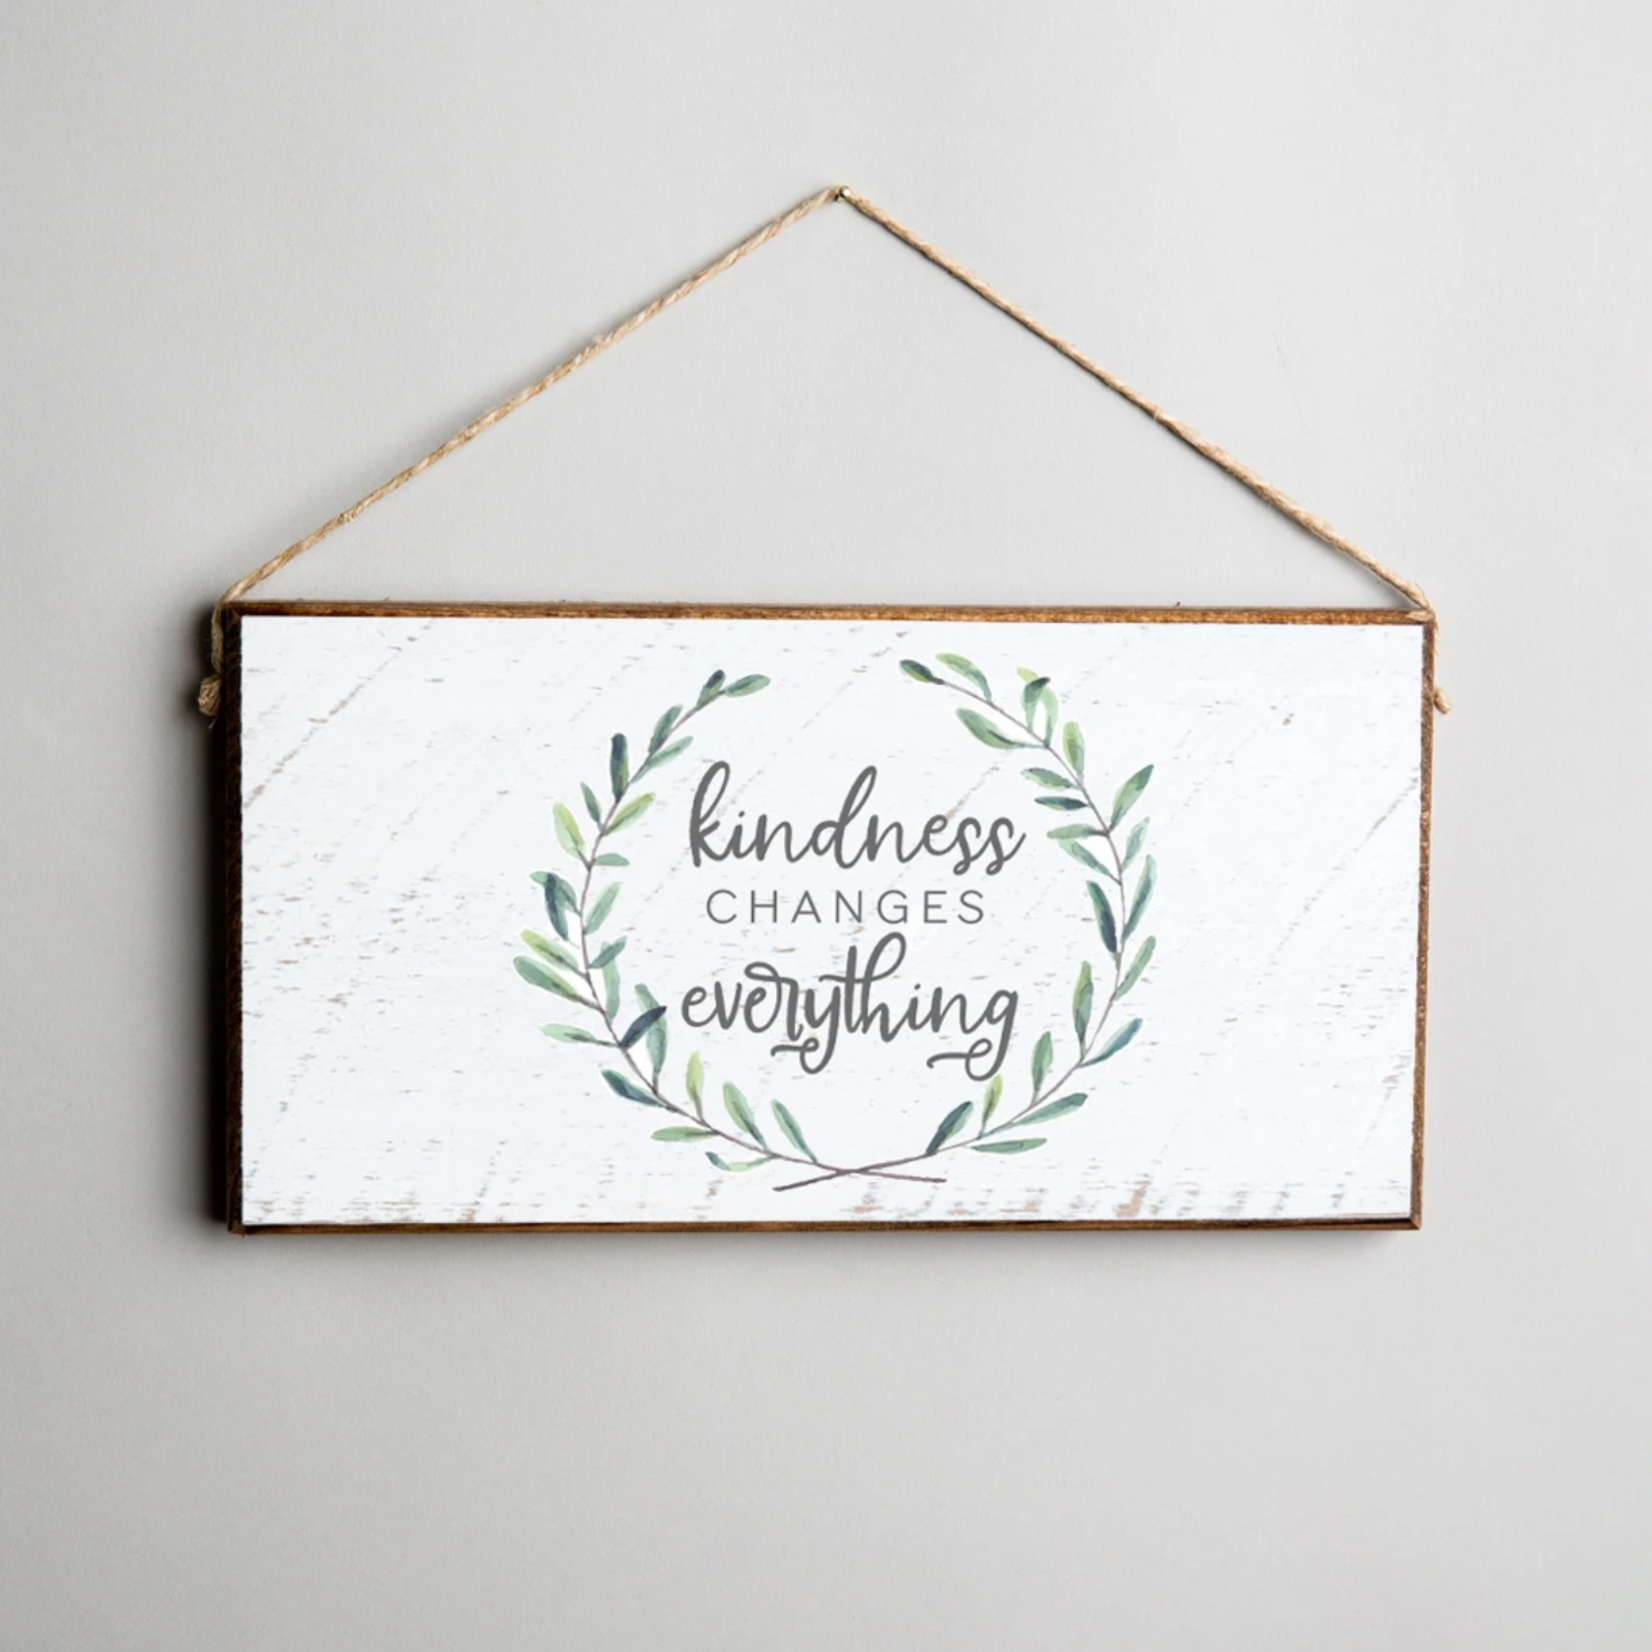 Rustic Marlin Rustic Marlin - Twine Sign - Kindness Everything